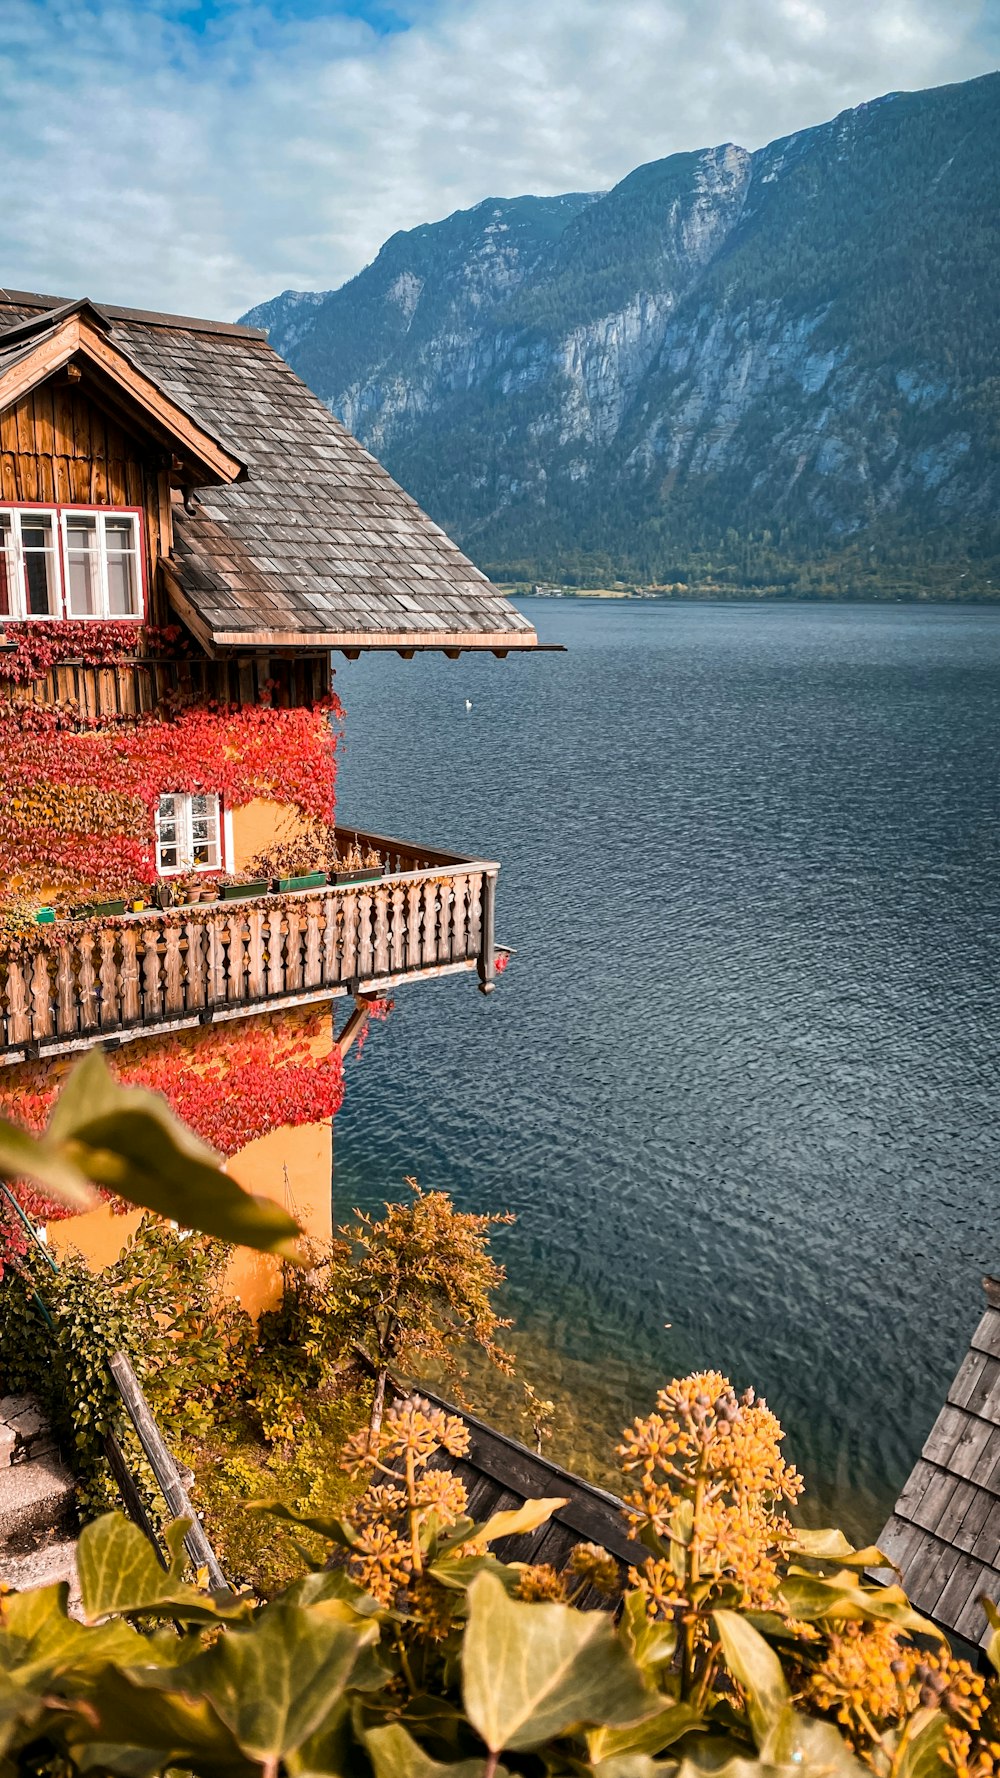 a house with a balcony next to a body of water